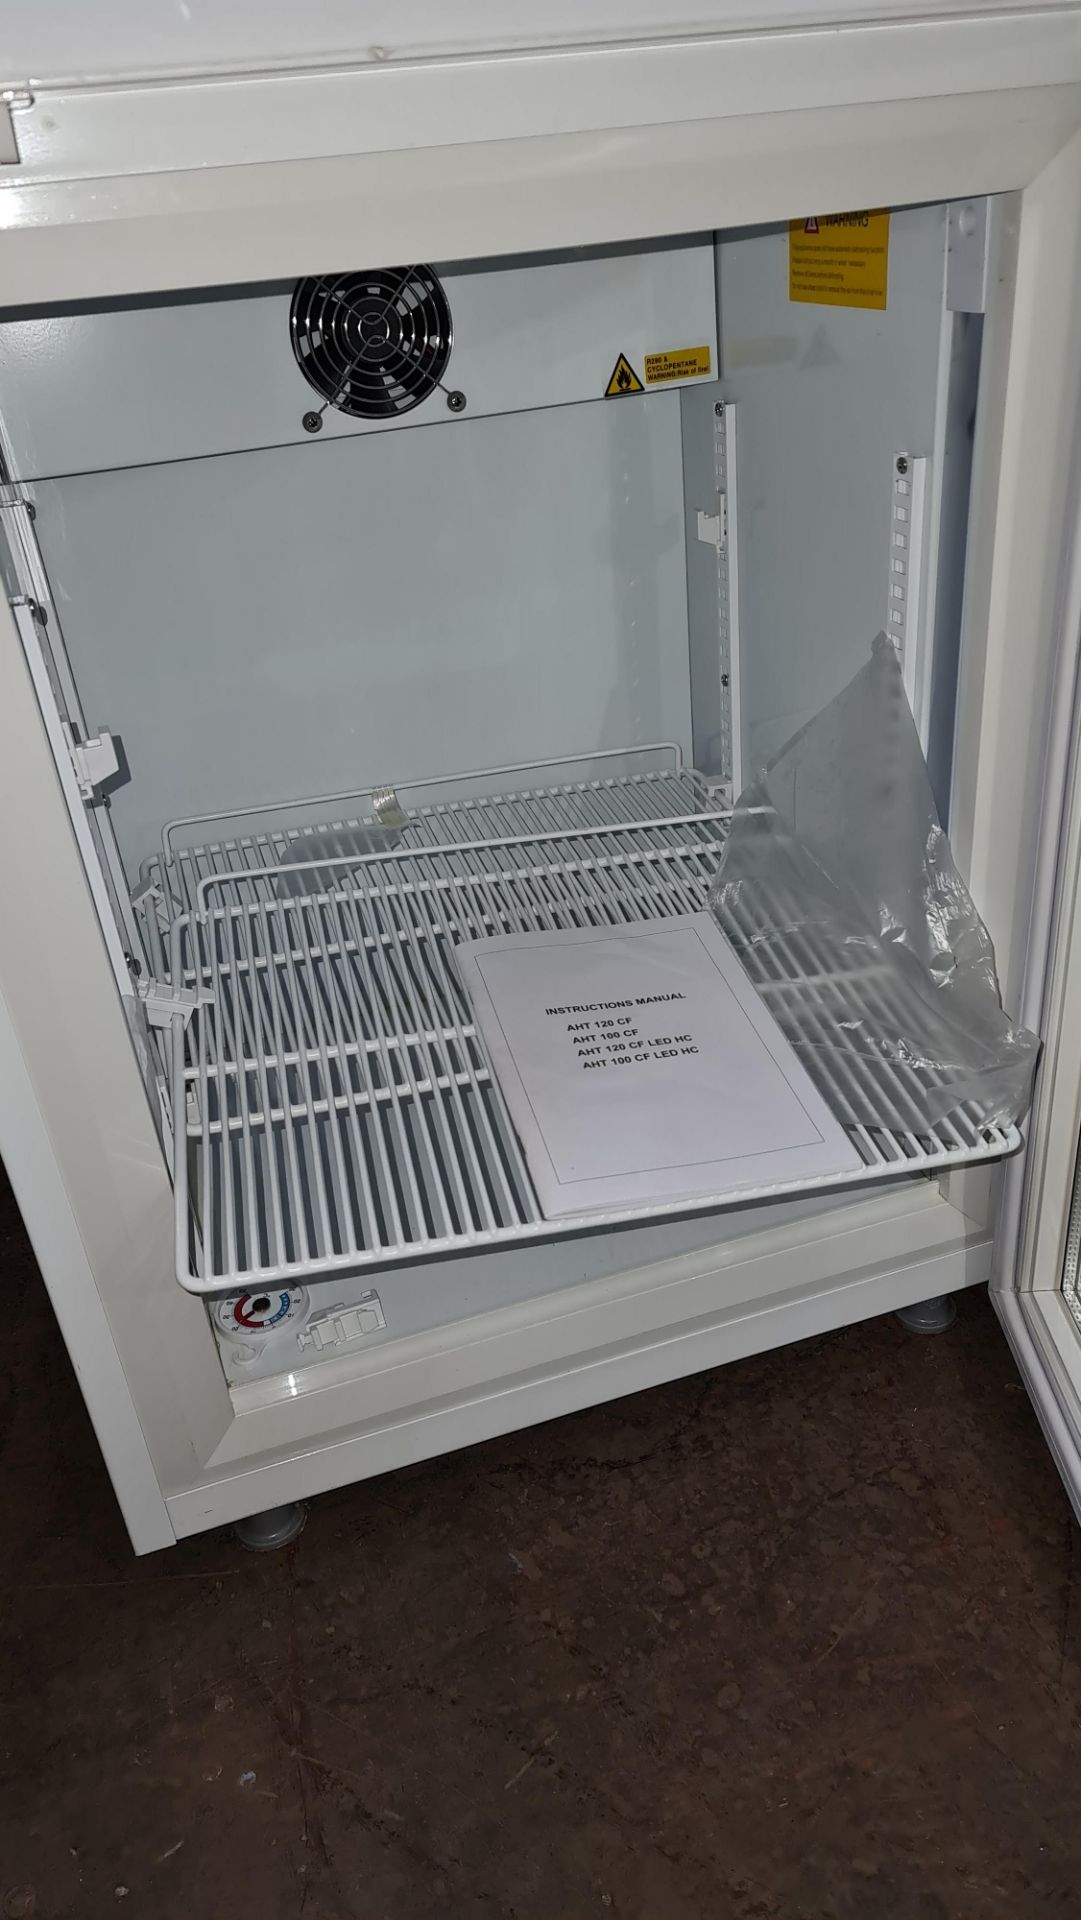 Coolpoint clear fronted fridge model AHT100 - Image 6 of 6